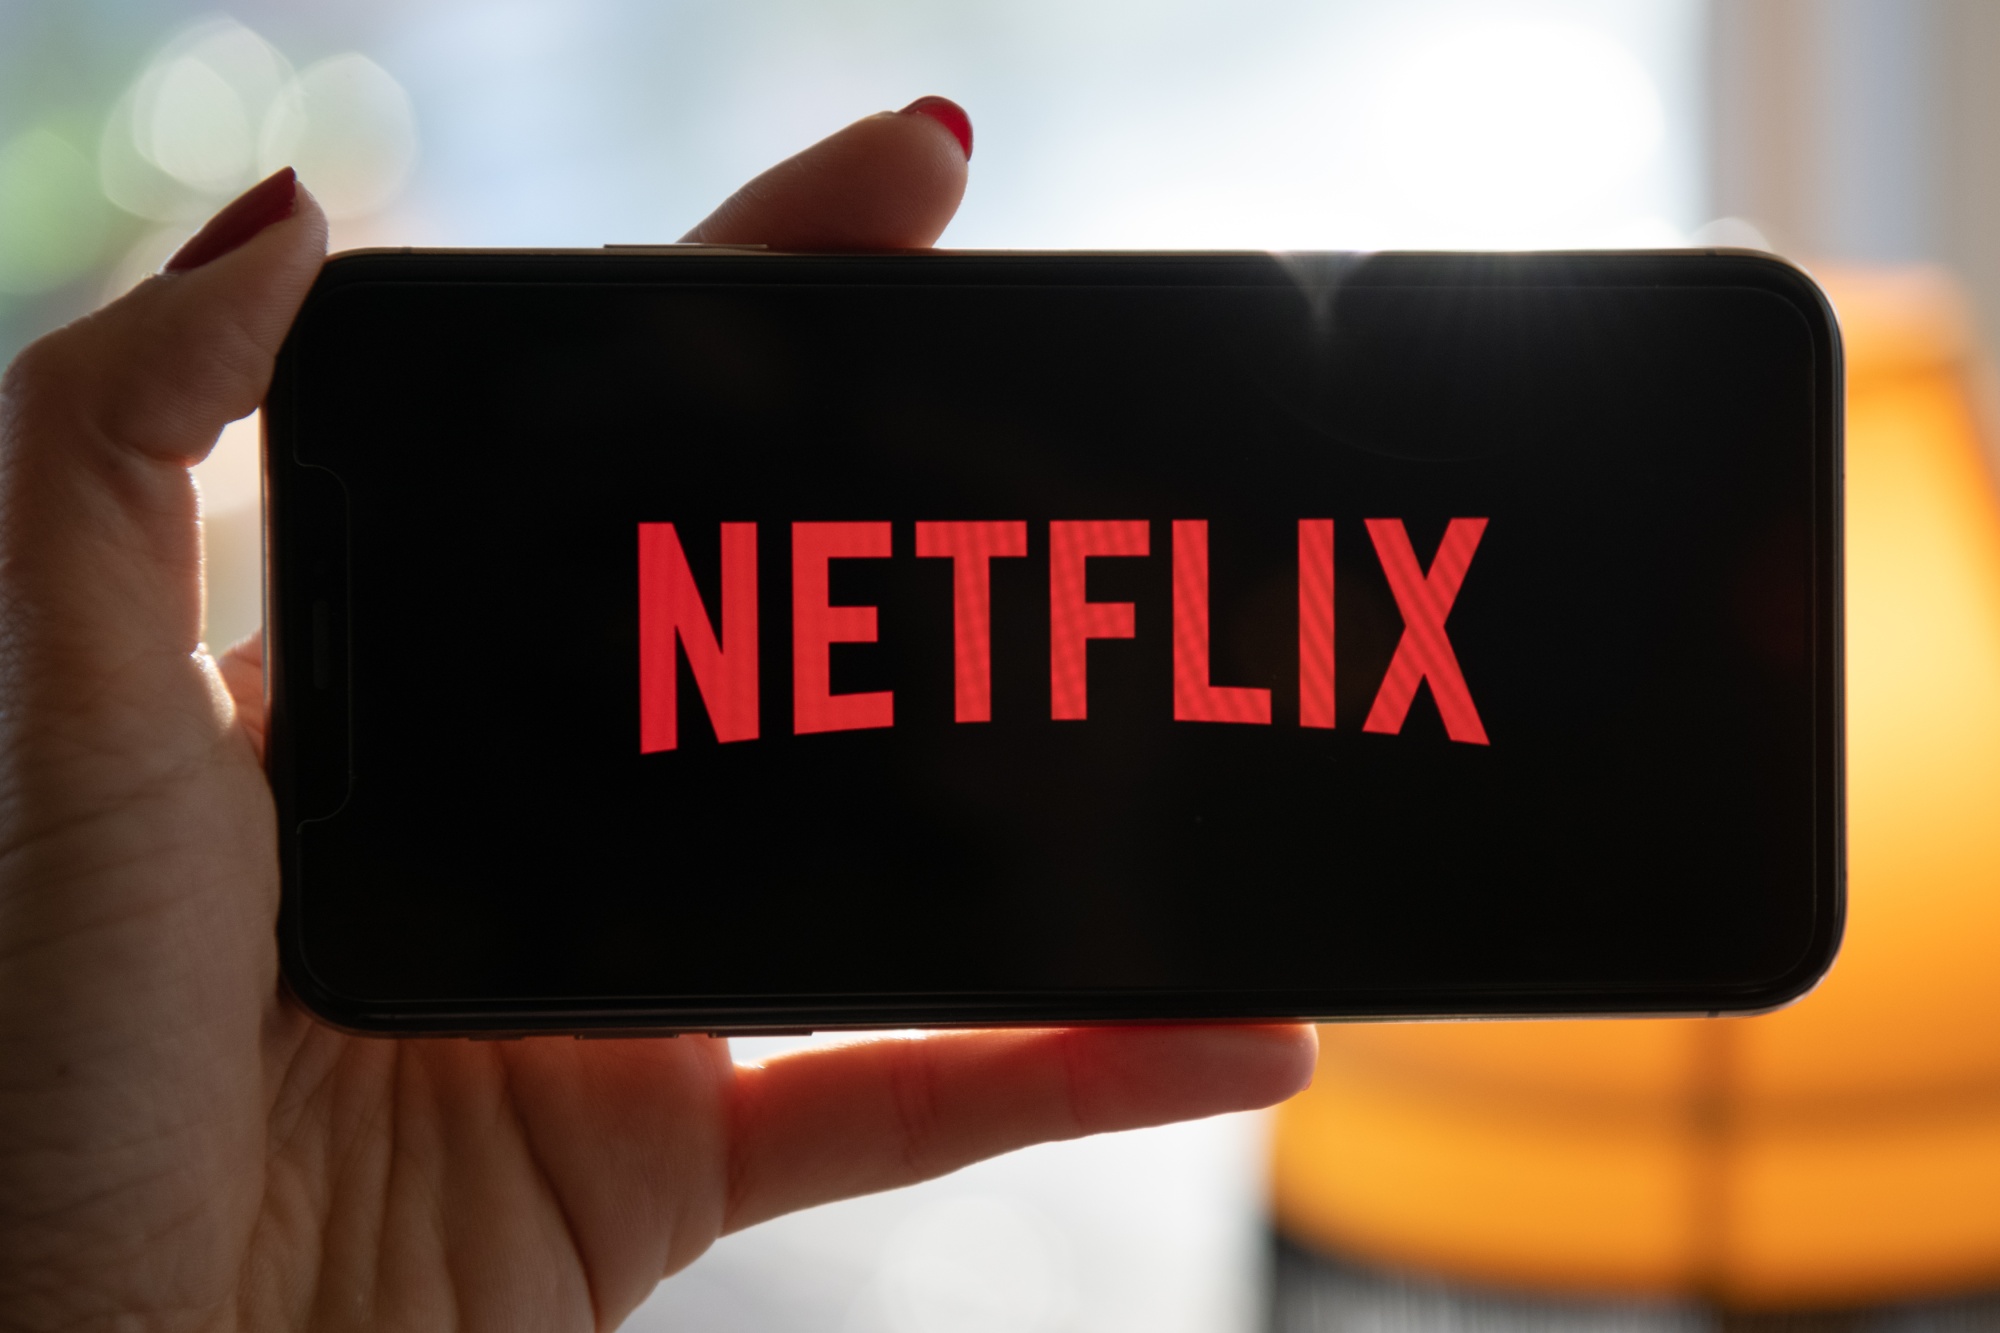 Netflix is reportedly developing 'Netflix for gaming' - FlatpanelsHD